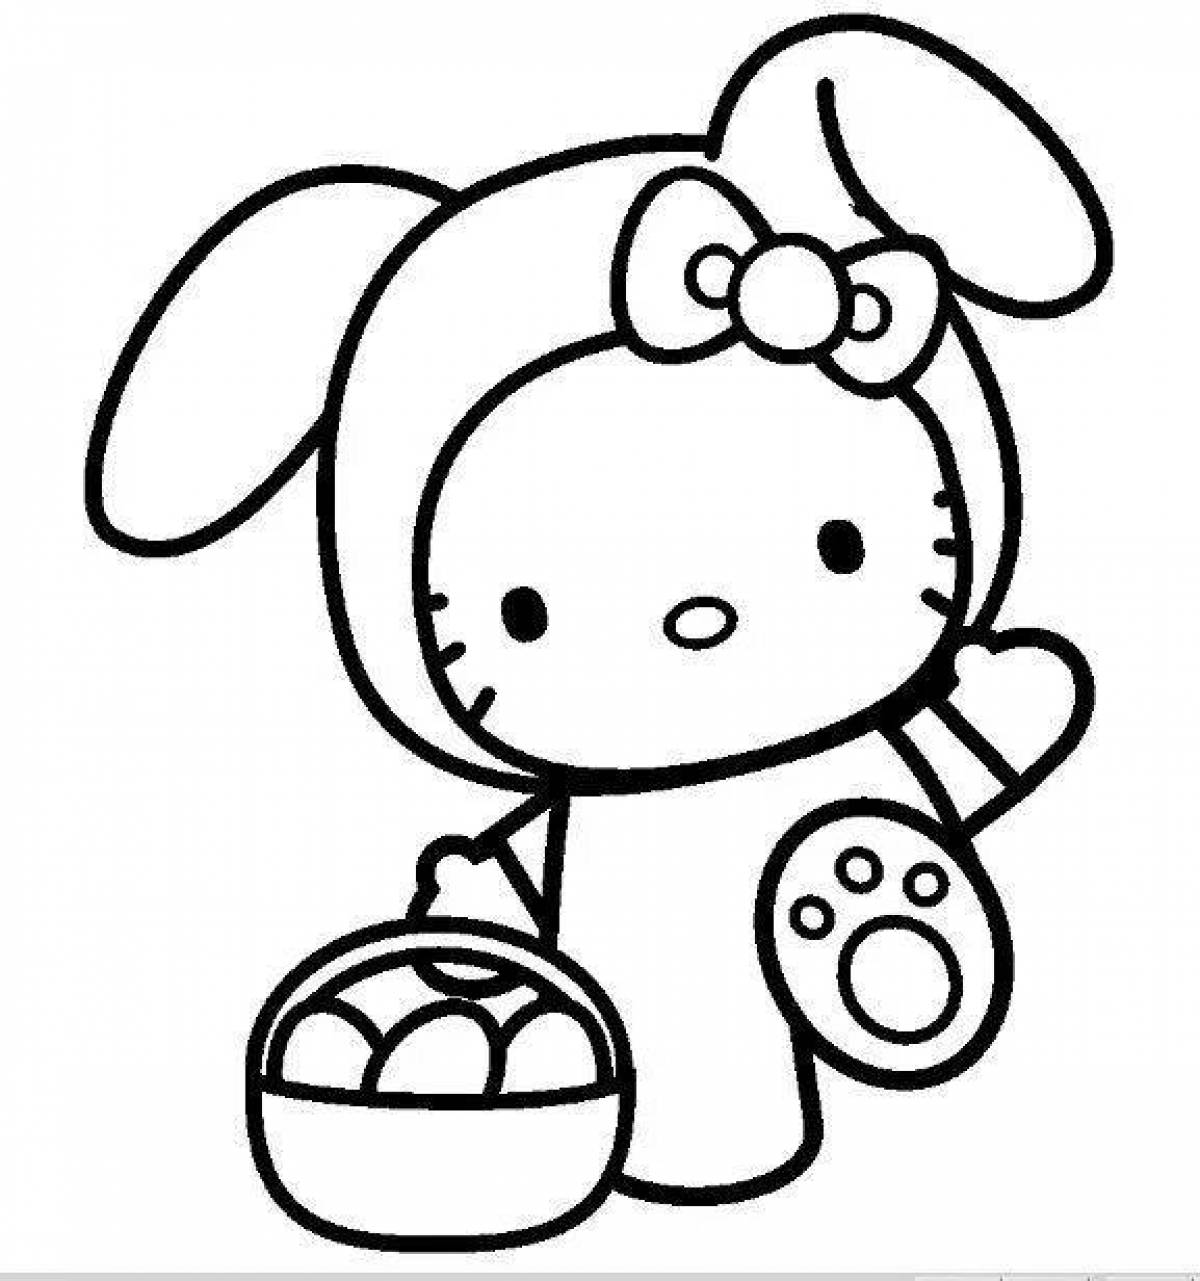 Shiny little hello kitty coloring page